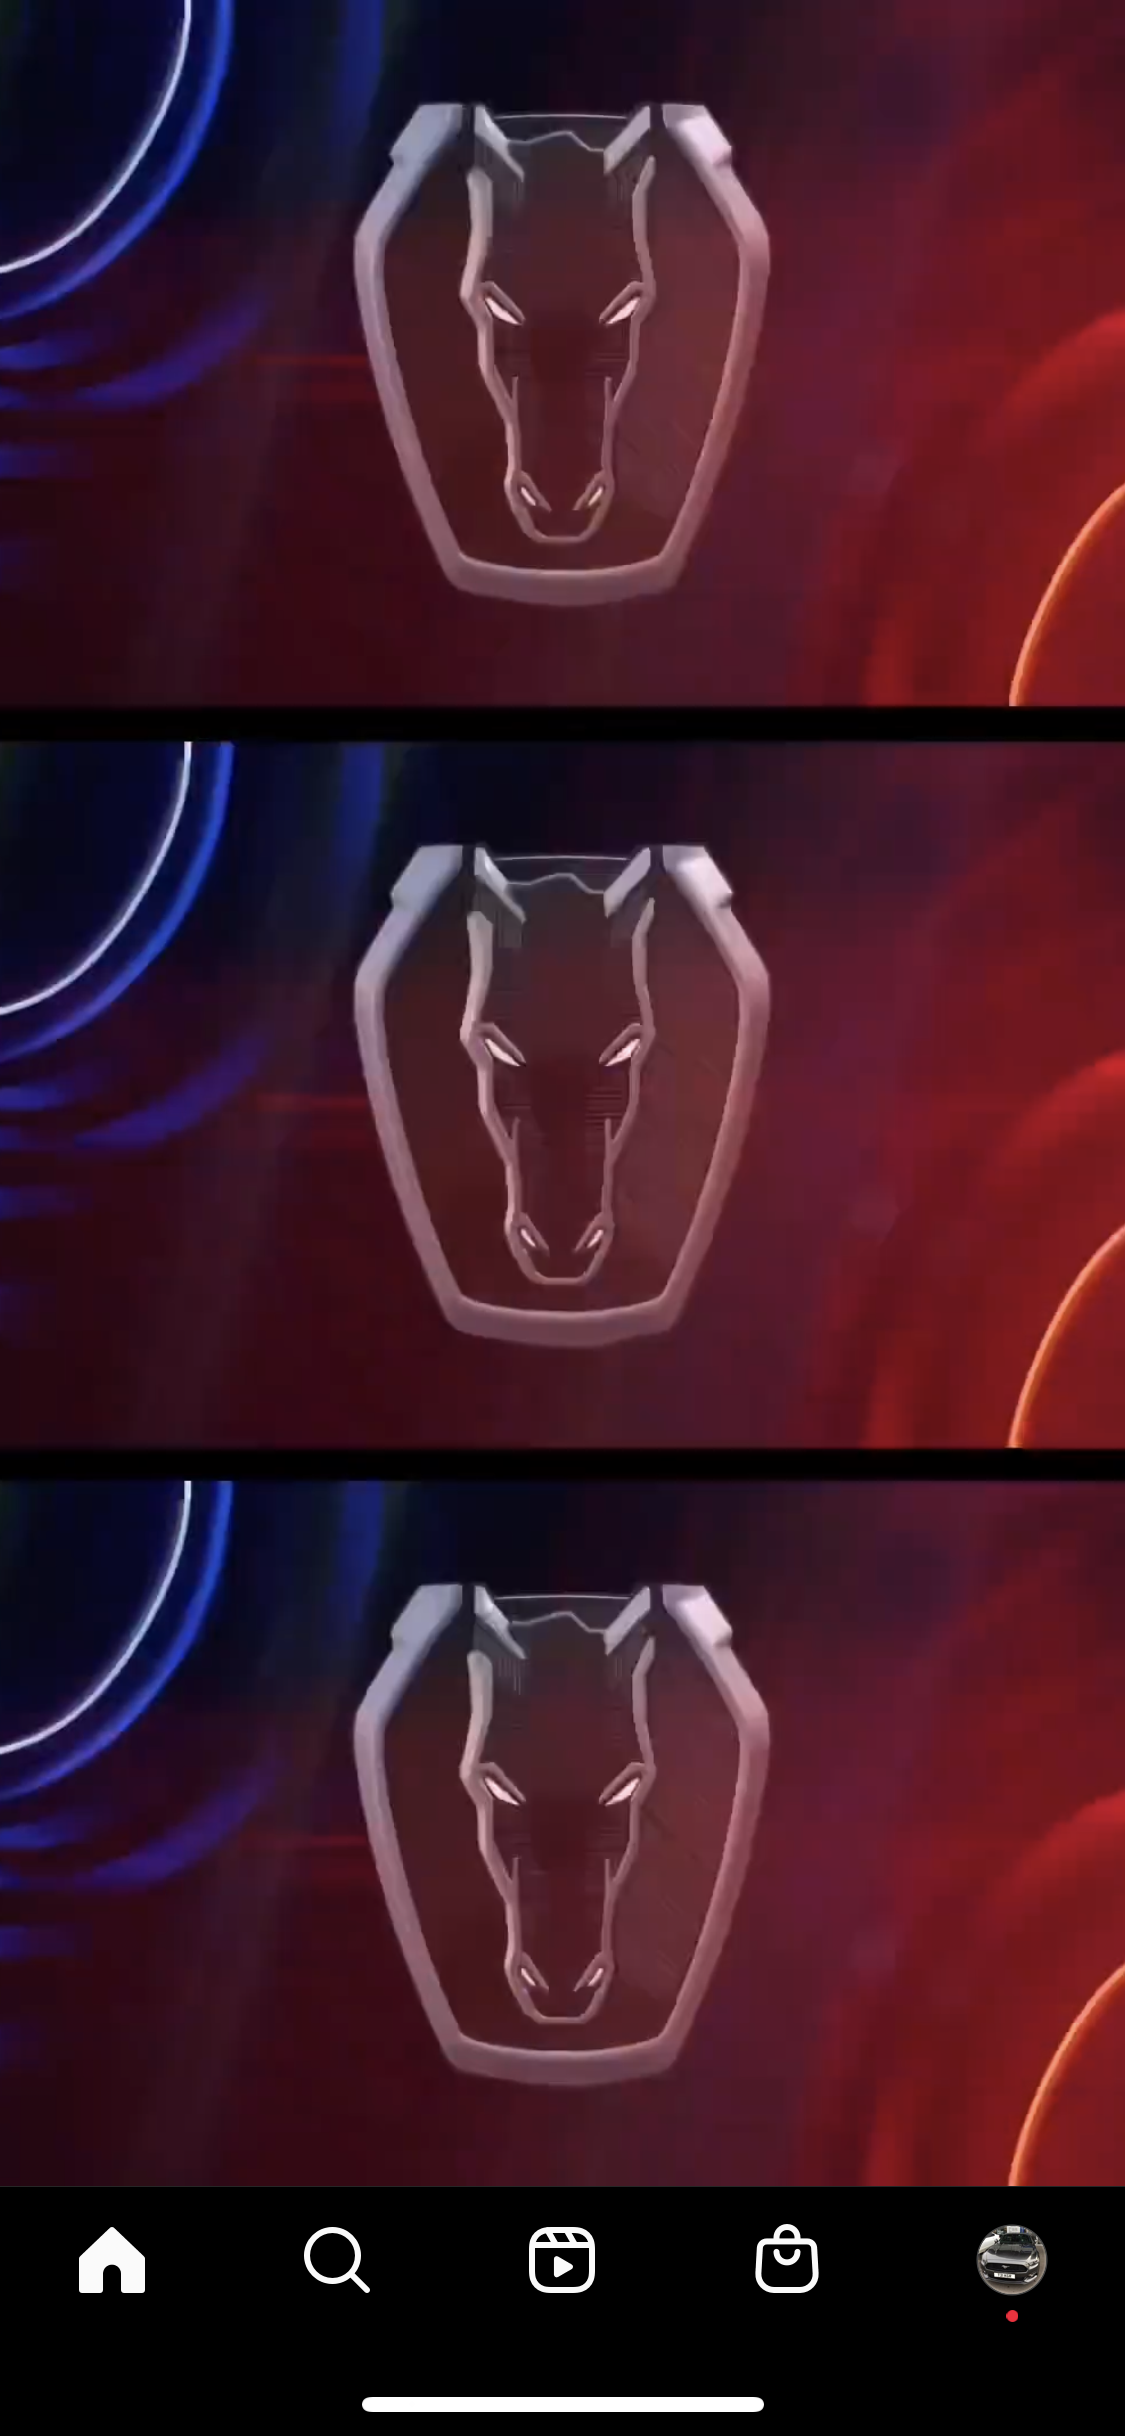 S650 Mustang New Mustang Pony badge shown in another S650 teaser D1C4C23E-567B-4B65-857D-A1AF17F9B216